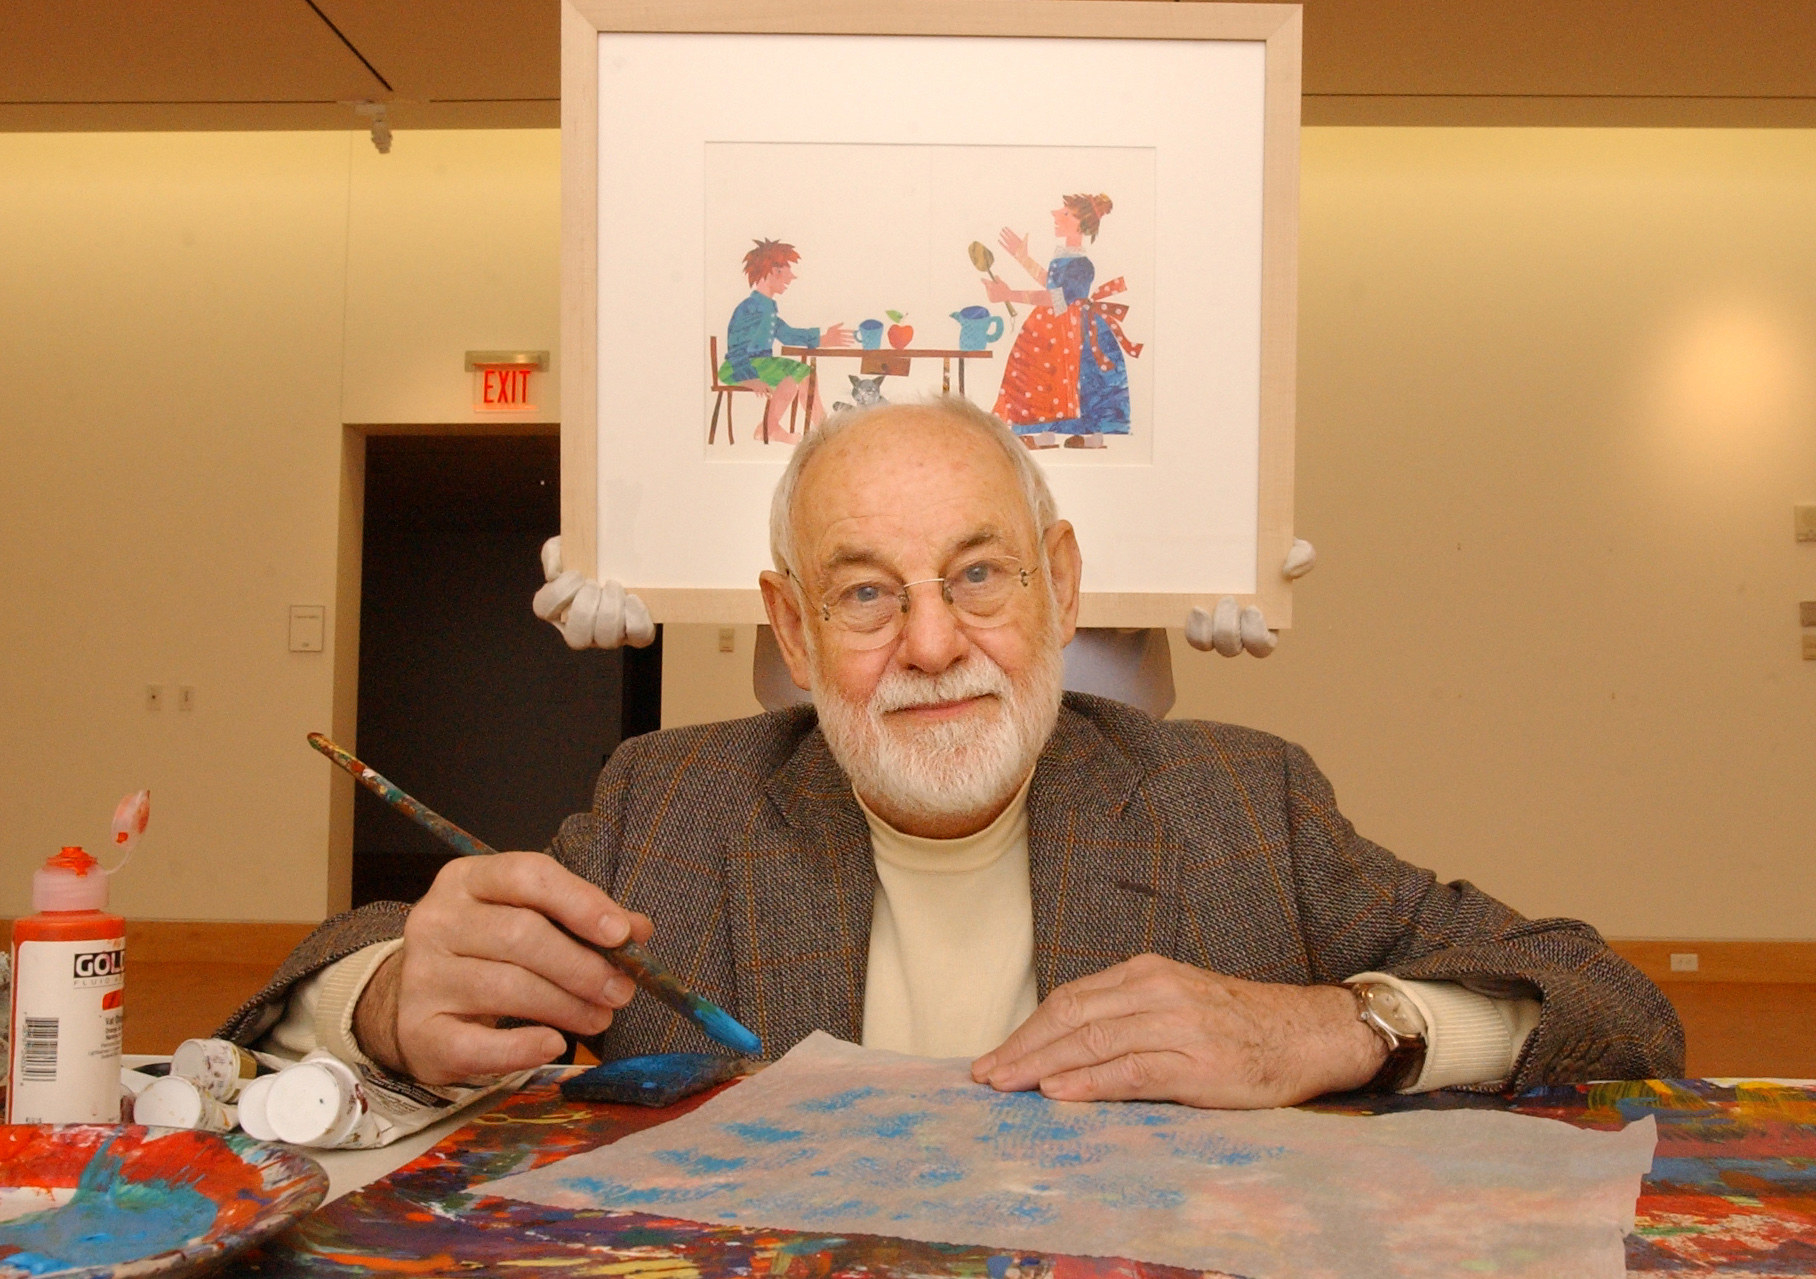 Eric Carle with a paintbrush and paint with someone holding up a framed illustration behind him 